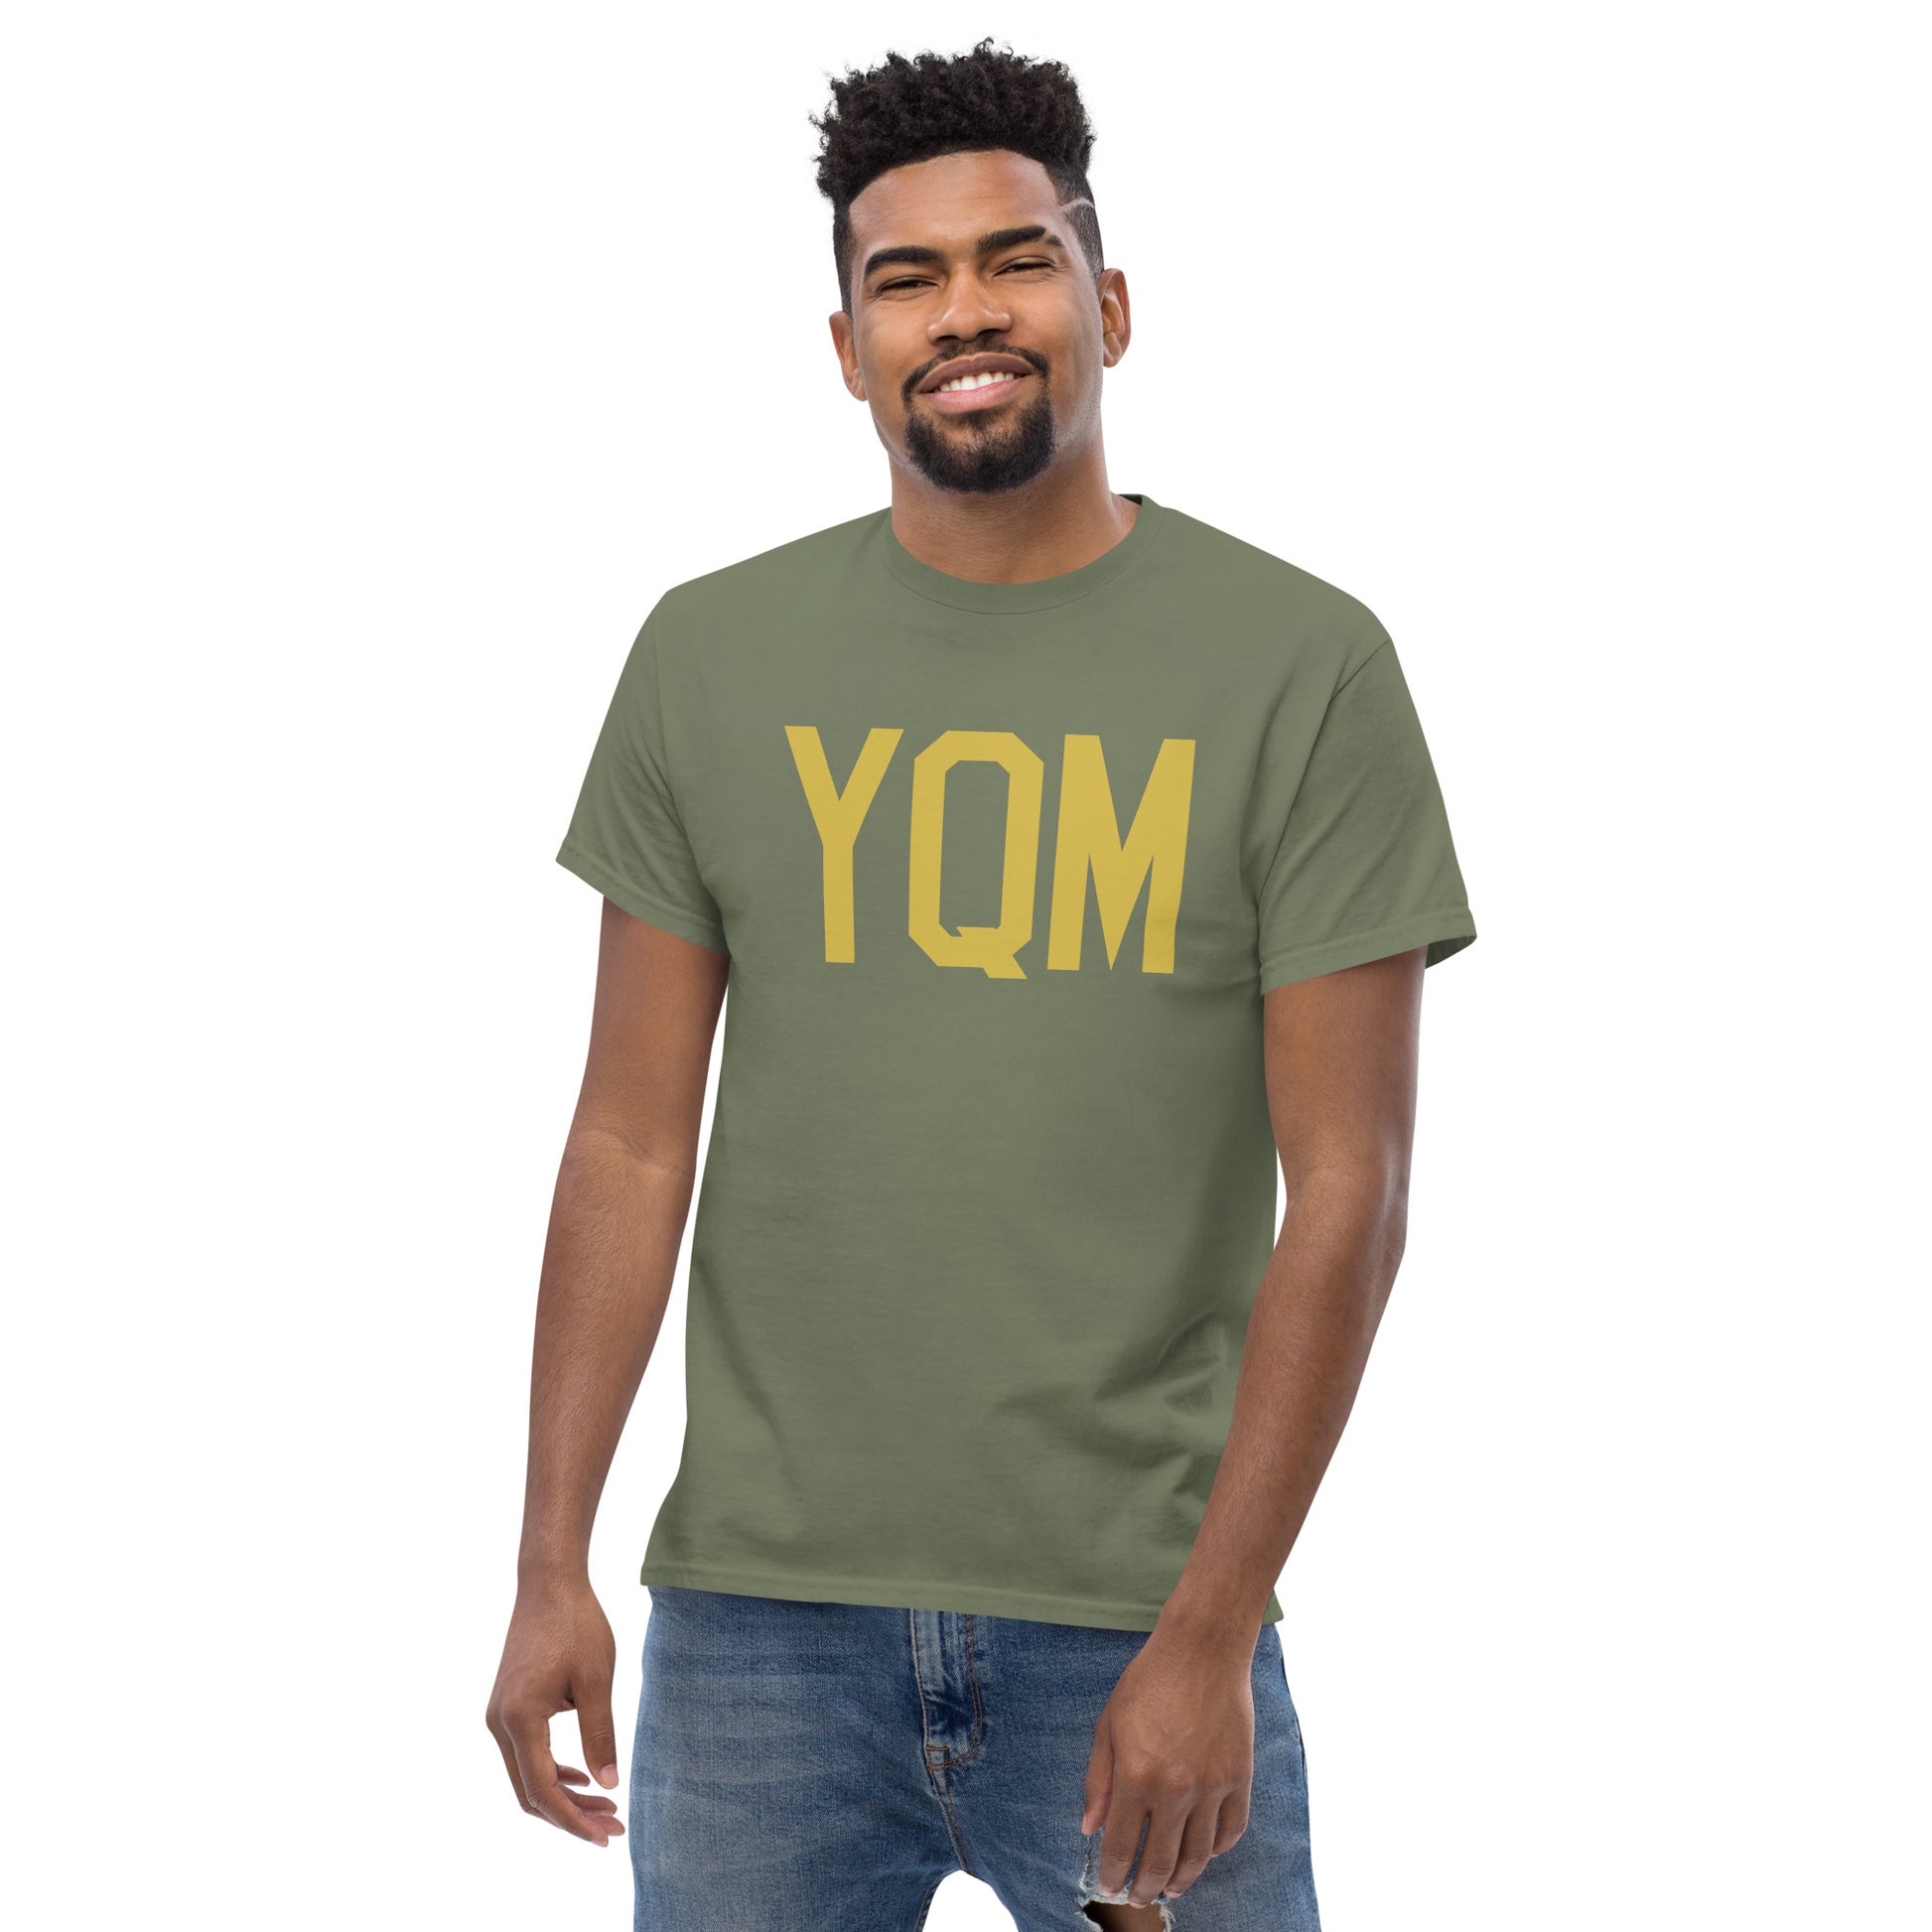 Aviation Enthusiast Men's Tee - Old Gold Graphic • YQM Moncton • YHM Designs - Image 06